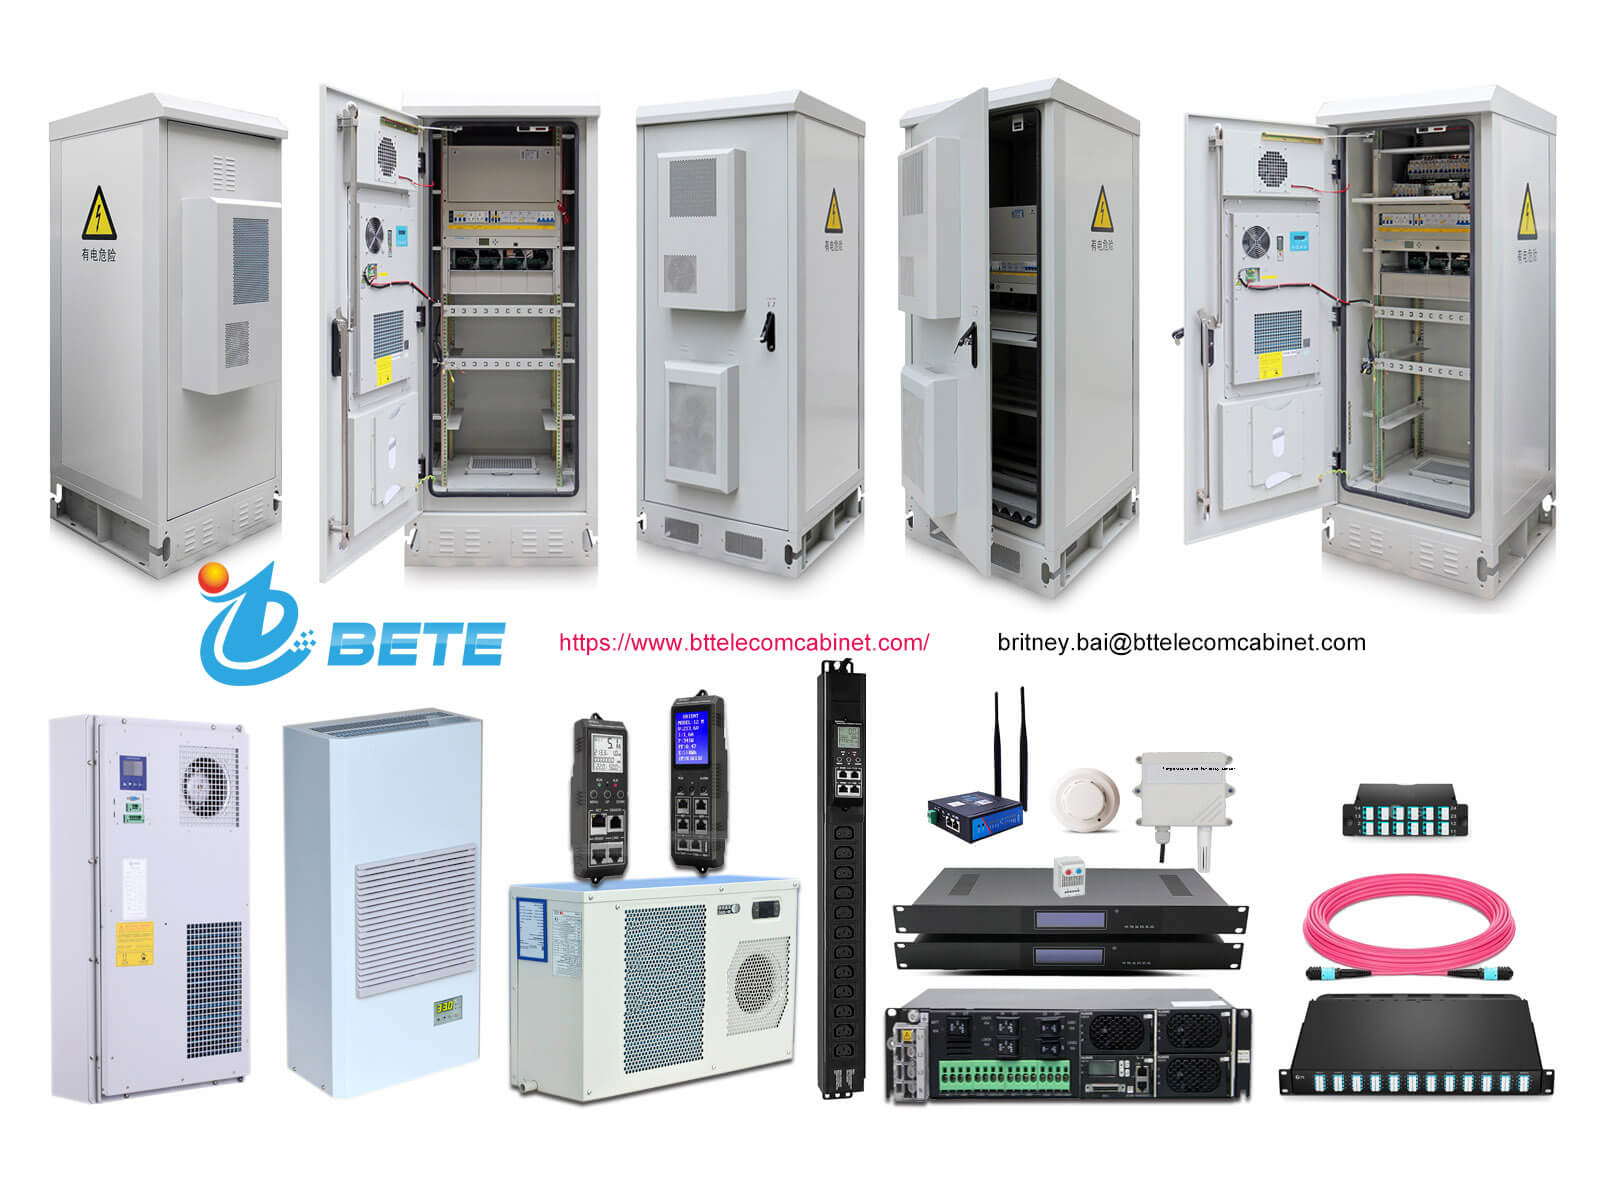 Application and characteristics of outdoor communication cabinets